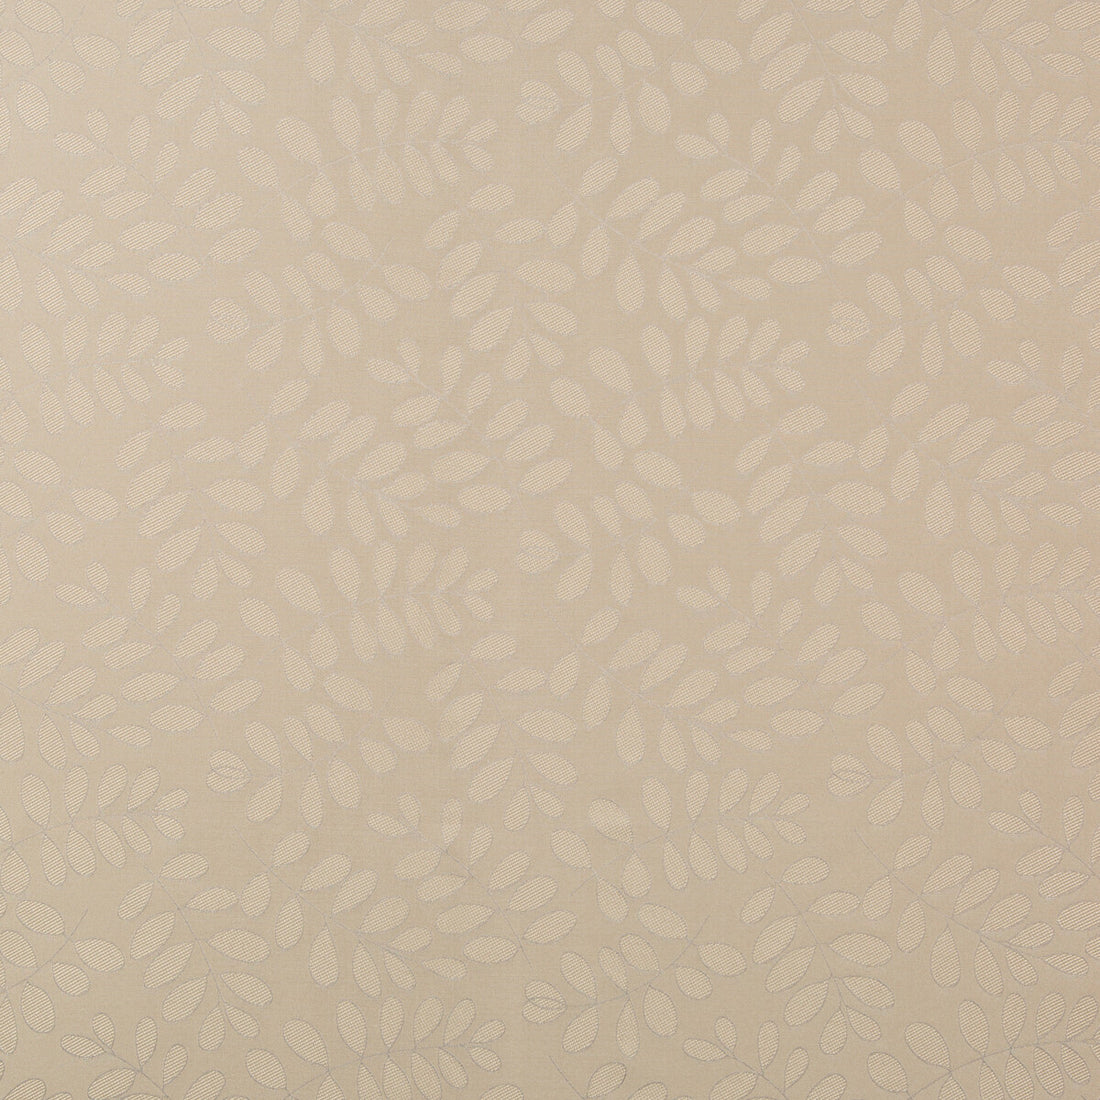 Etta Petal fabric in champagne color - pattern 4661.16.0 - by Kravet Contract